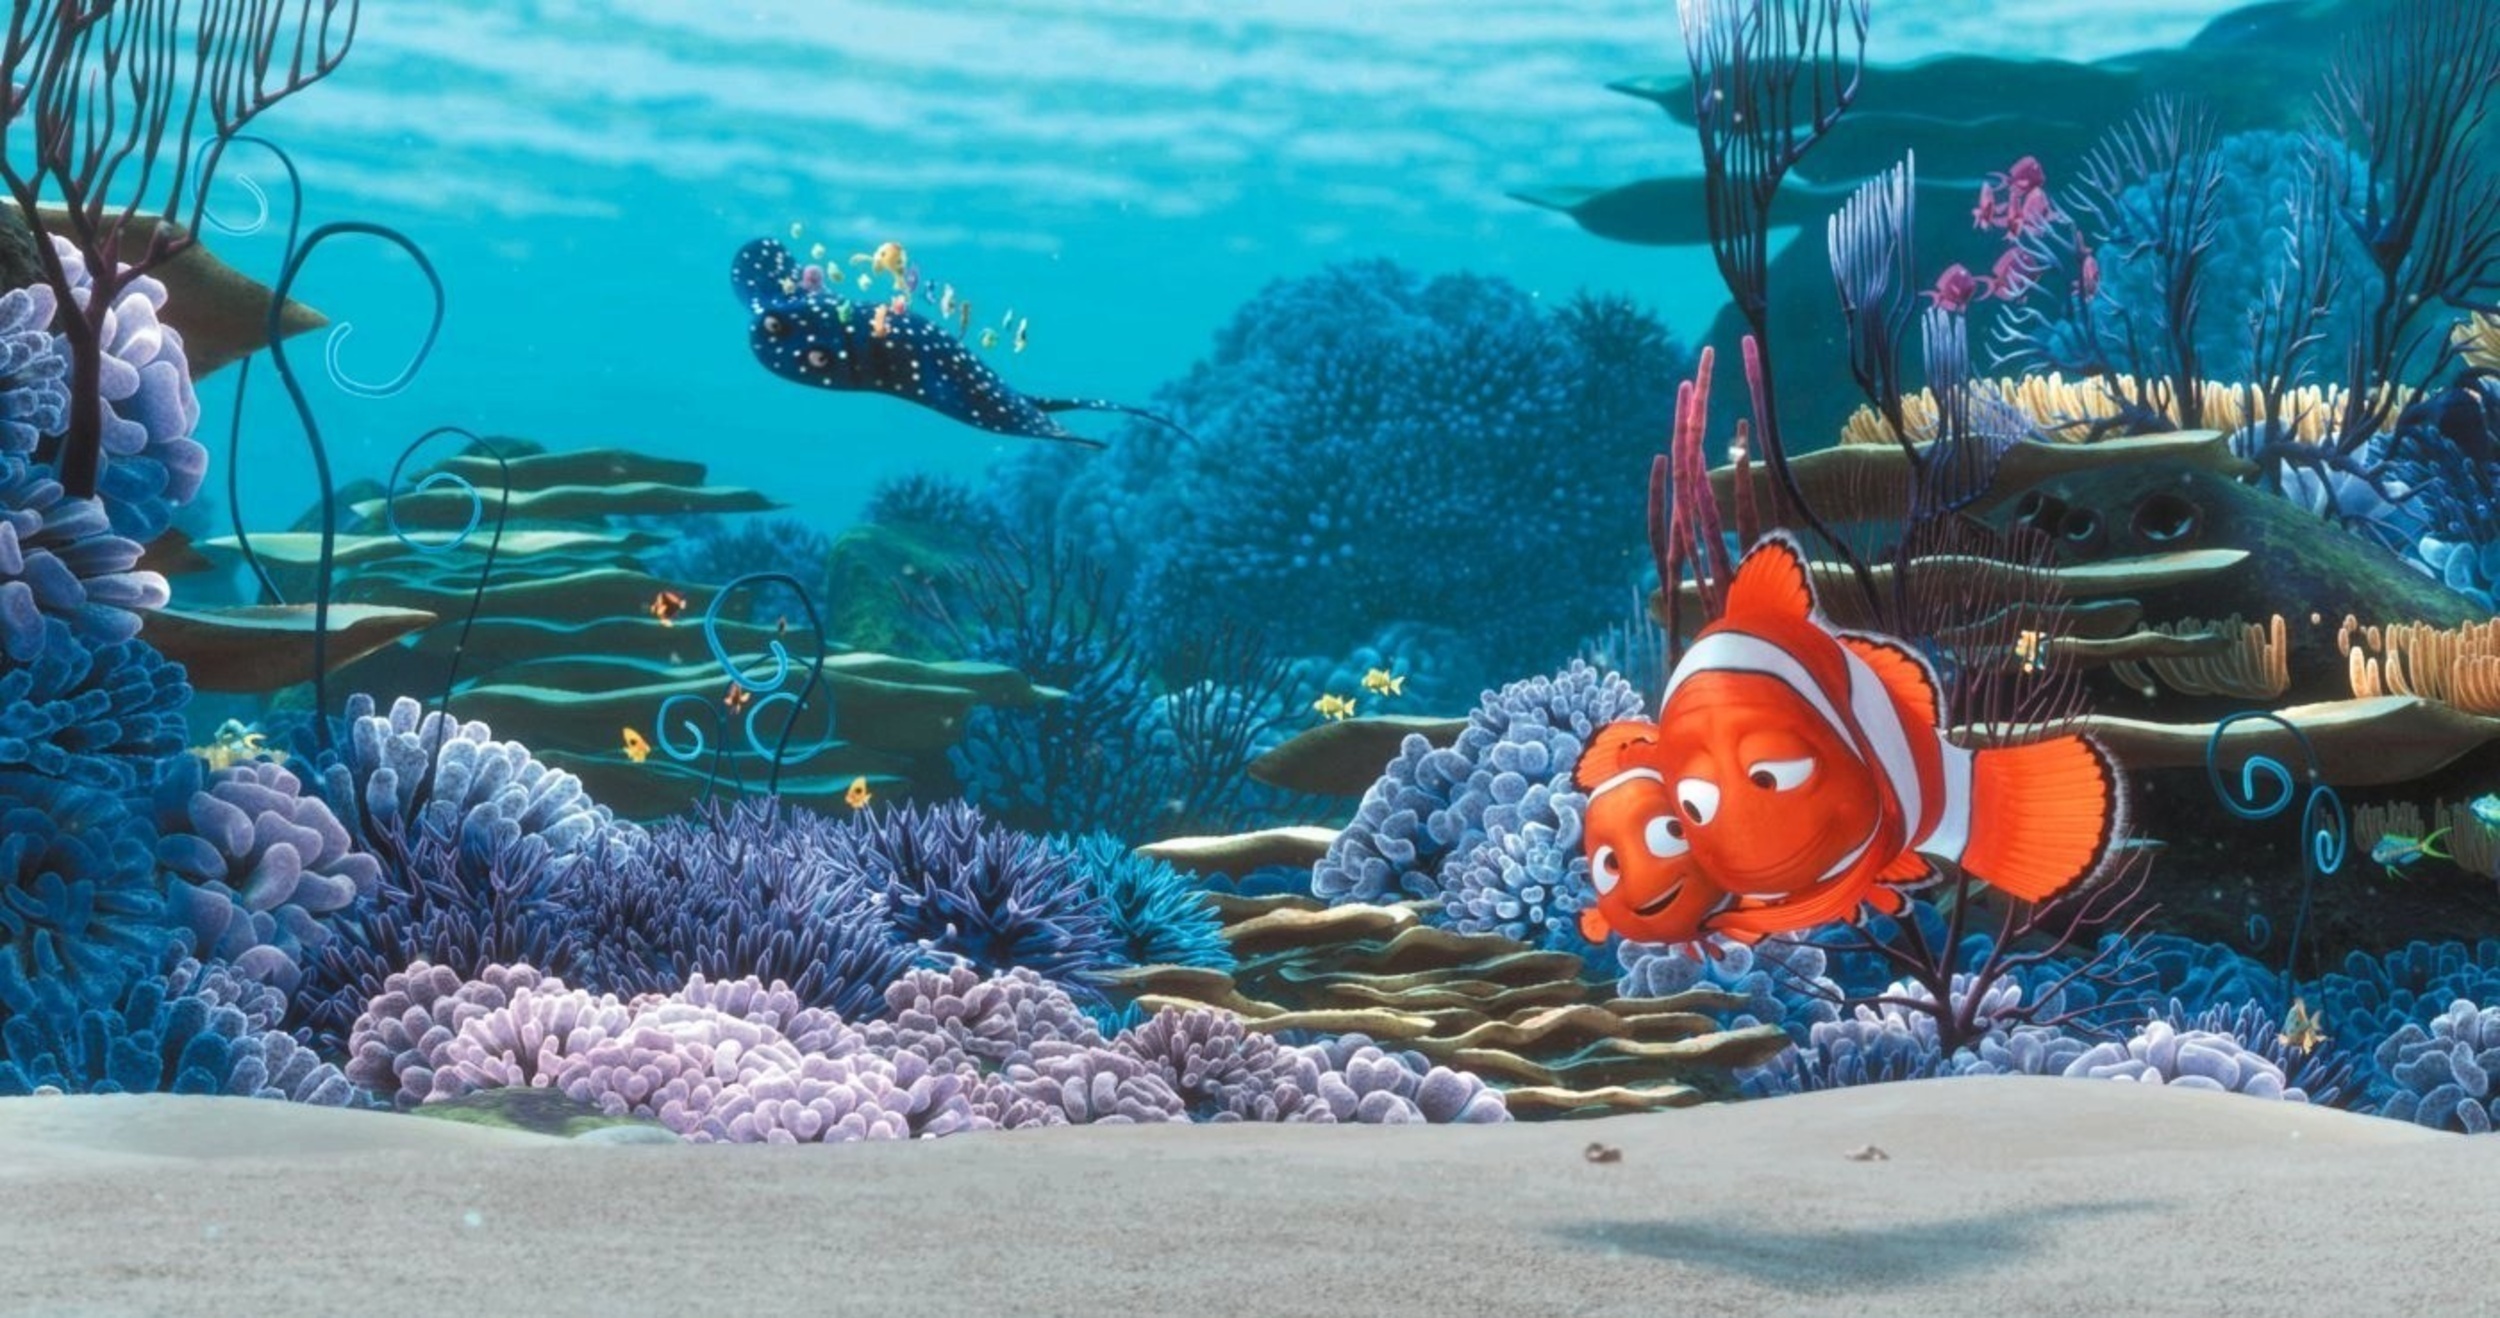 <p>Pixar has always been known as a studio that pays meticulous attention to detail. This extends to <span><em>Finding Nemo</em>, </span>the beloved 2003 film that focuses on a father clownfish, Marlin, who sets out to save his son Nemo and, along the way, meets several other fantastic fish characters, including the absentminded Dory. It’s a fun and beautiful film but also true to science. Among other things, clownfish do indeed<a href="https://www.insider.com/real-facts-in-finding-nemo-pixar-movie-2019-6#marlin-and-nemo-are-both-clownfish-they-each-have-three-white-stripes-outlined-in-black-and-look-like-carbon-copies-of-each-other-1"><span> live inside anemones</span></a>, and whales do indeed seem to have their own form of language (this latter is the source of some major humor with Dory). </p><p>You may also like: <a href='https://www.yardbarker.com/entertainment/articles/the_25_best_acoustic_version_of_popular_songs_112323/s1__34236758'>The 25 best acoustic version of popular songs</a></p>